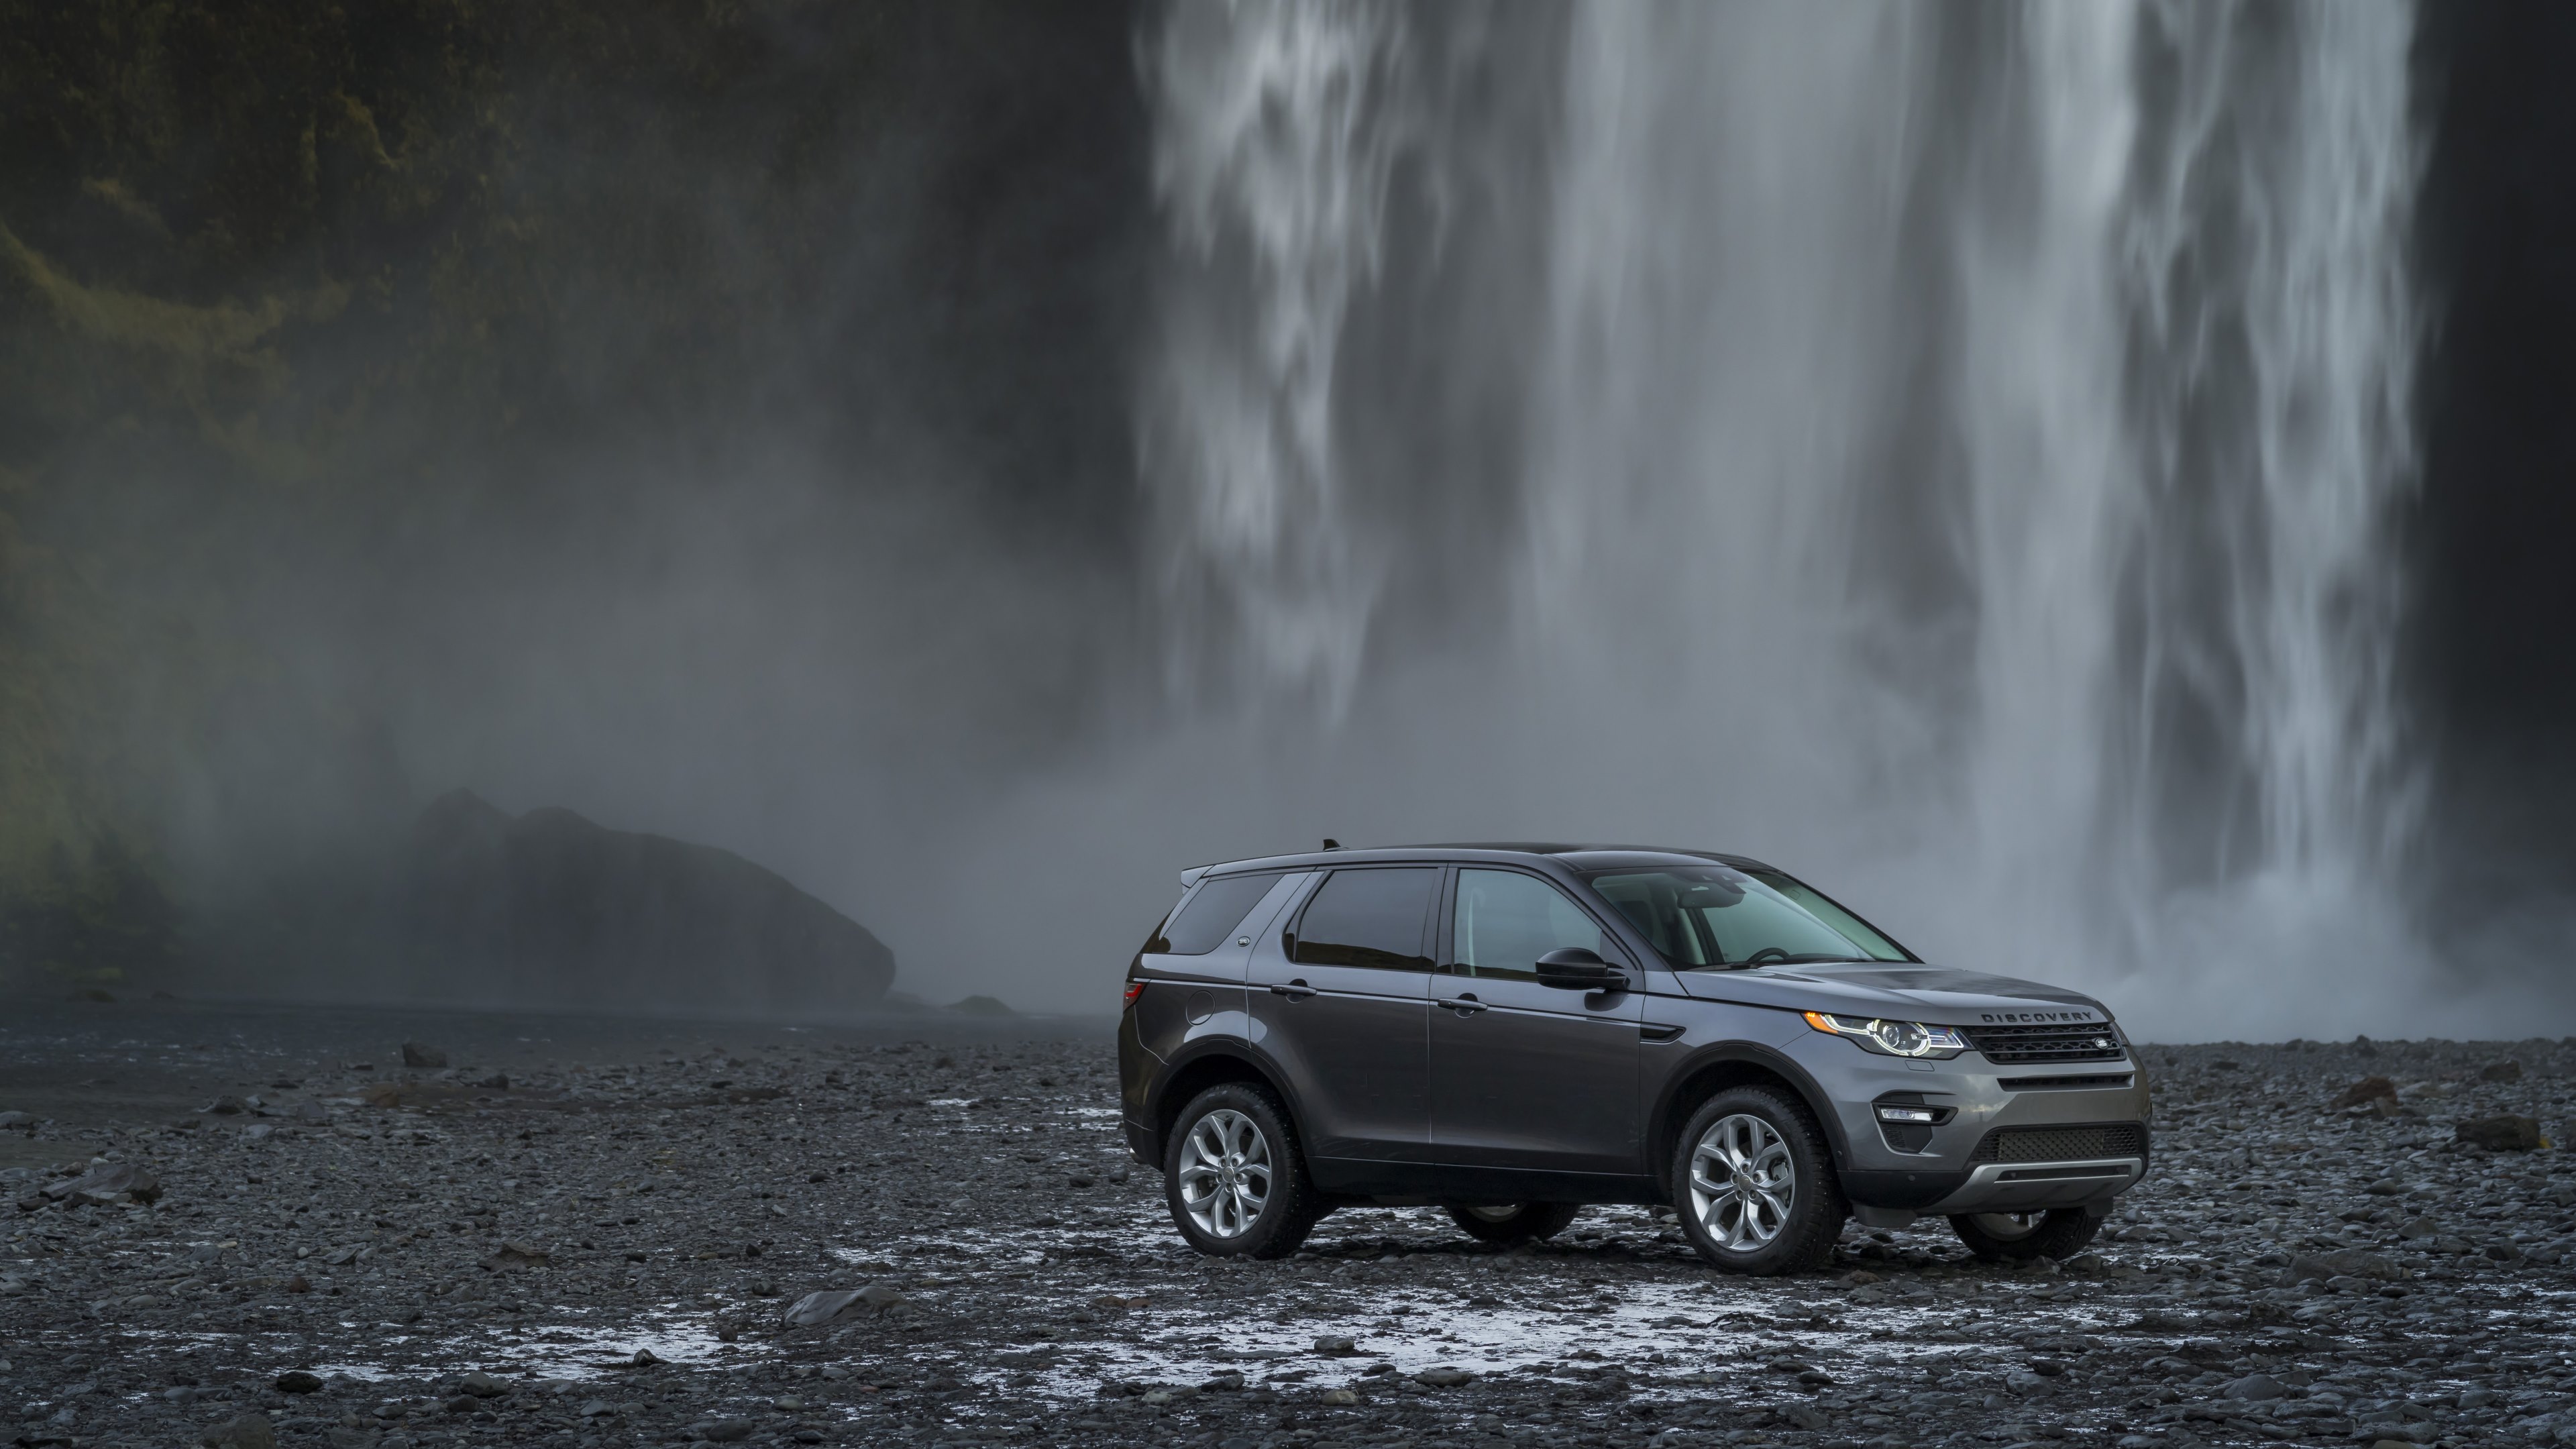 Free Download Land Rover Discovery Sport Hd Wallpapers 3840x2160 For Your Desktop Mobile Tablet Explore 36 Land Rover Discovery Sport Wallpapers Land Rover Discovery Sport Wallpapers Land Rover Discovery